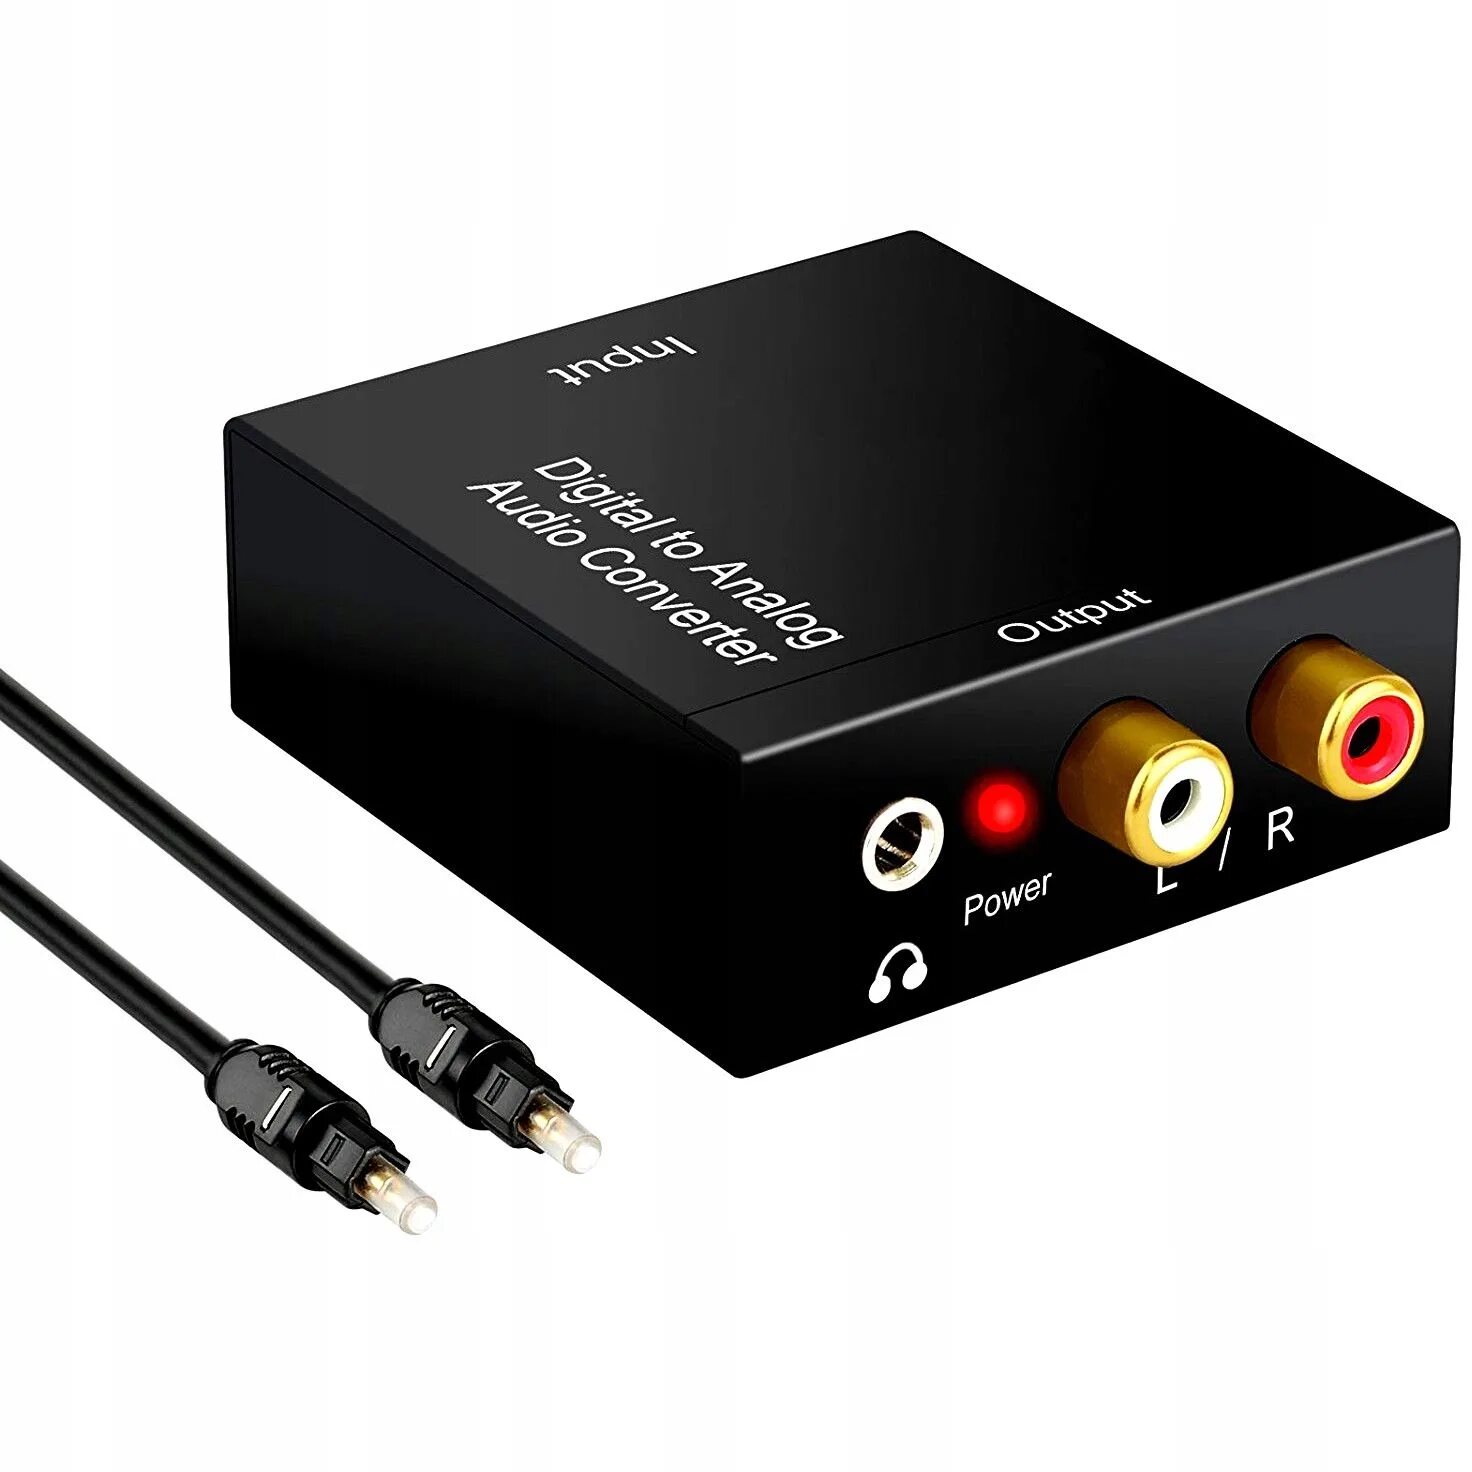 Цифровой аудио звук. Optical Audio Toslink Coaxial. RCA to Toslink адаптер. SPDIF to 3.5 Jack адаптер. SPDIF Coaxial to 3.5mm Jack.